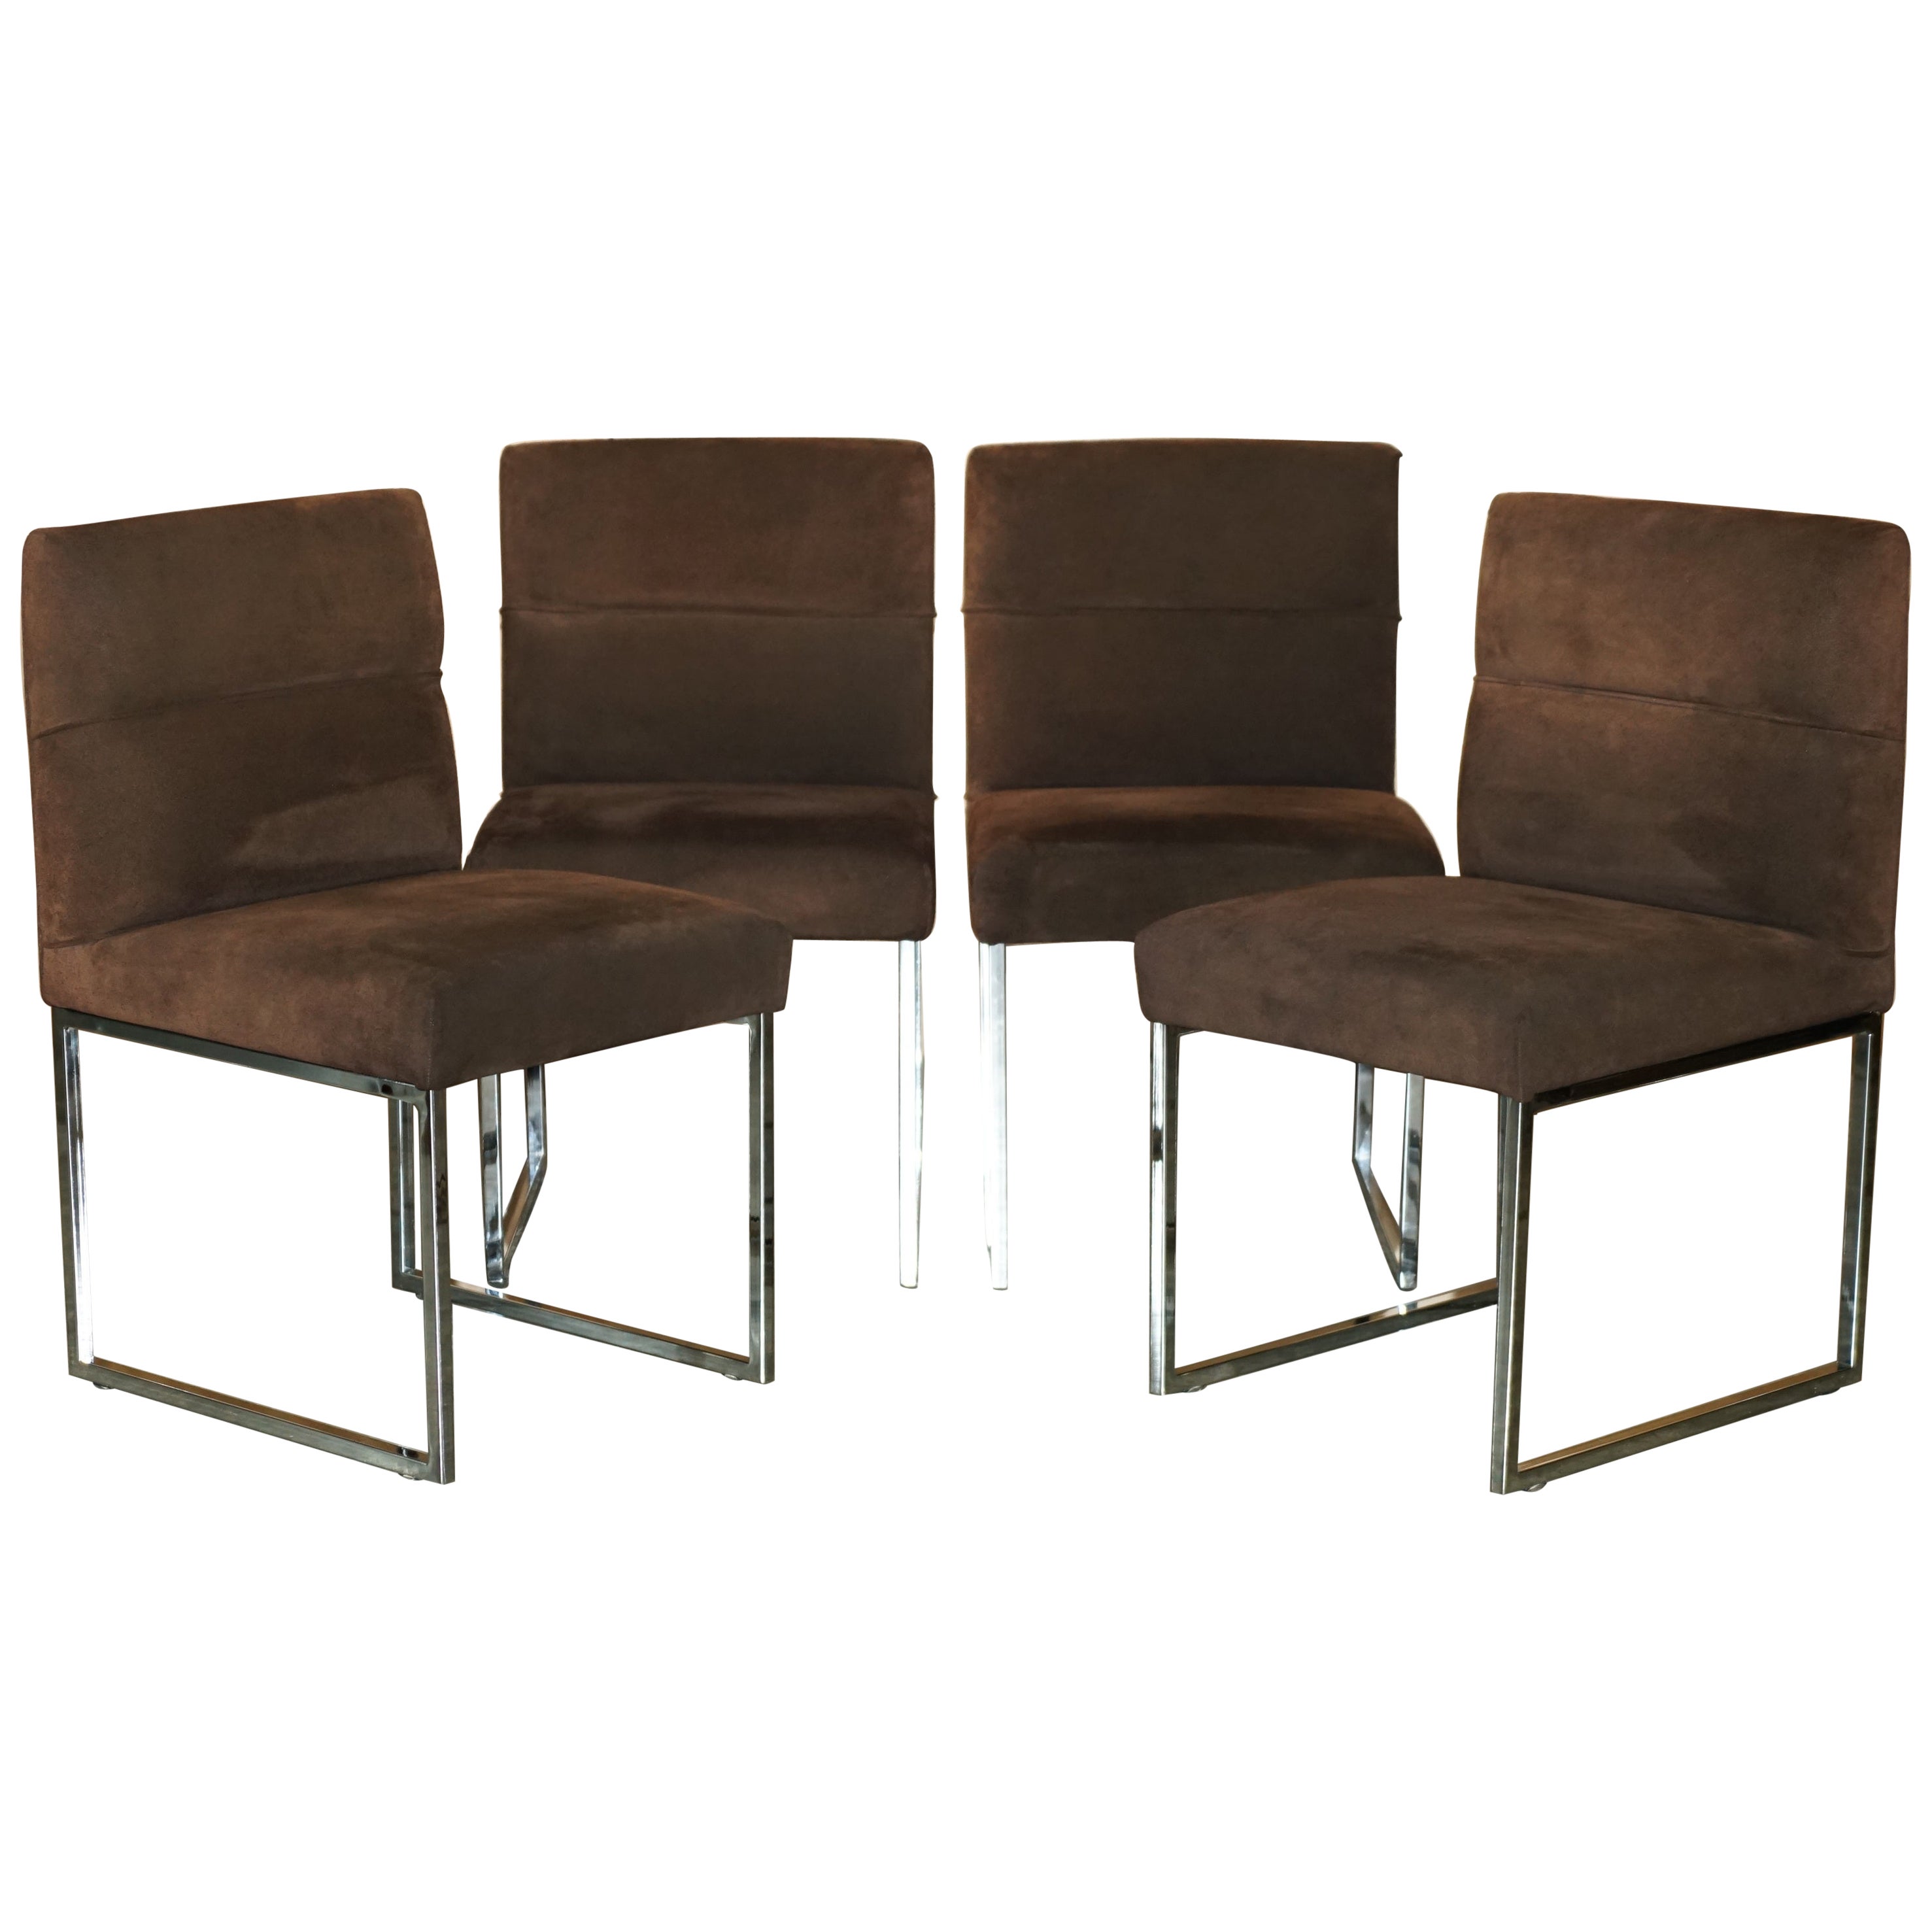 STUNNiNG SET OF FOUR FENDI CASA BROWN SUEDE DINING CHAIRS WITH CHROME FRAMES For Sale